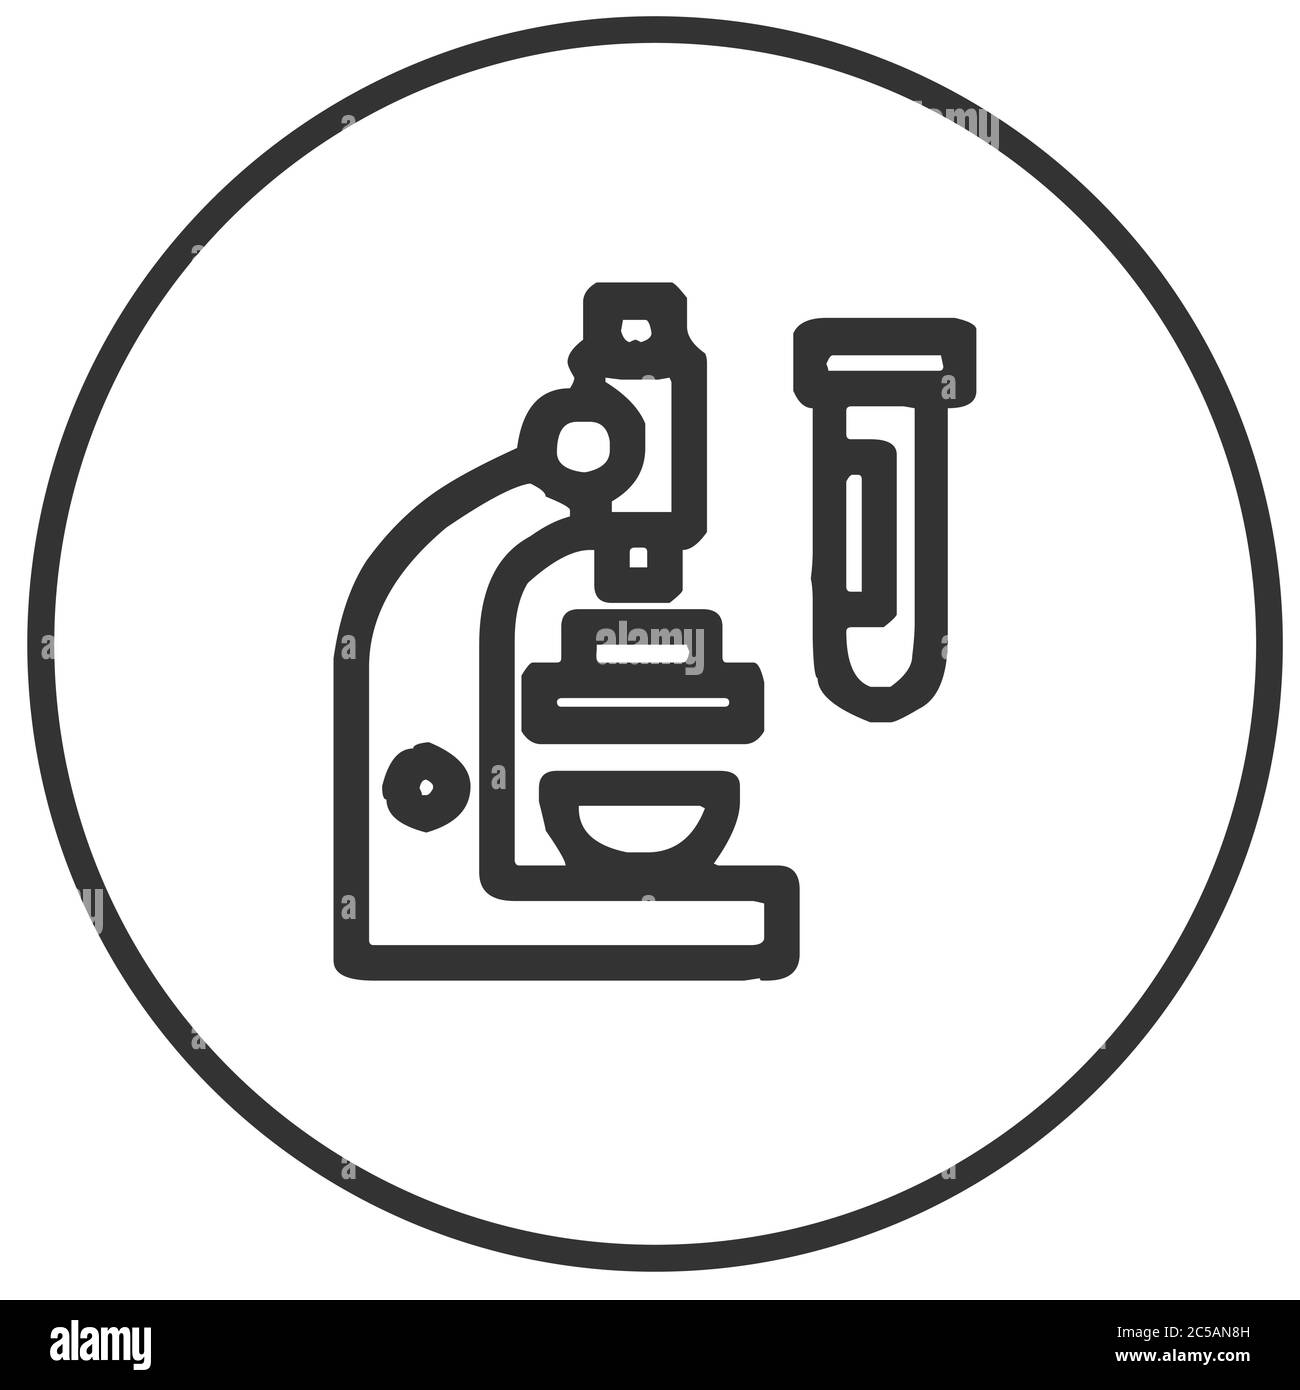 Microscope icon. Examining the collected sample for possible contamination. Stock Vector